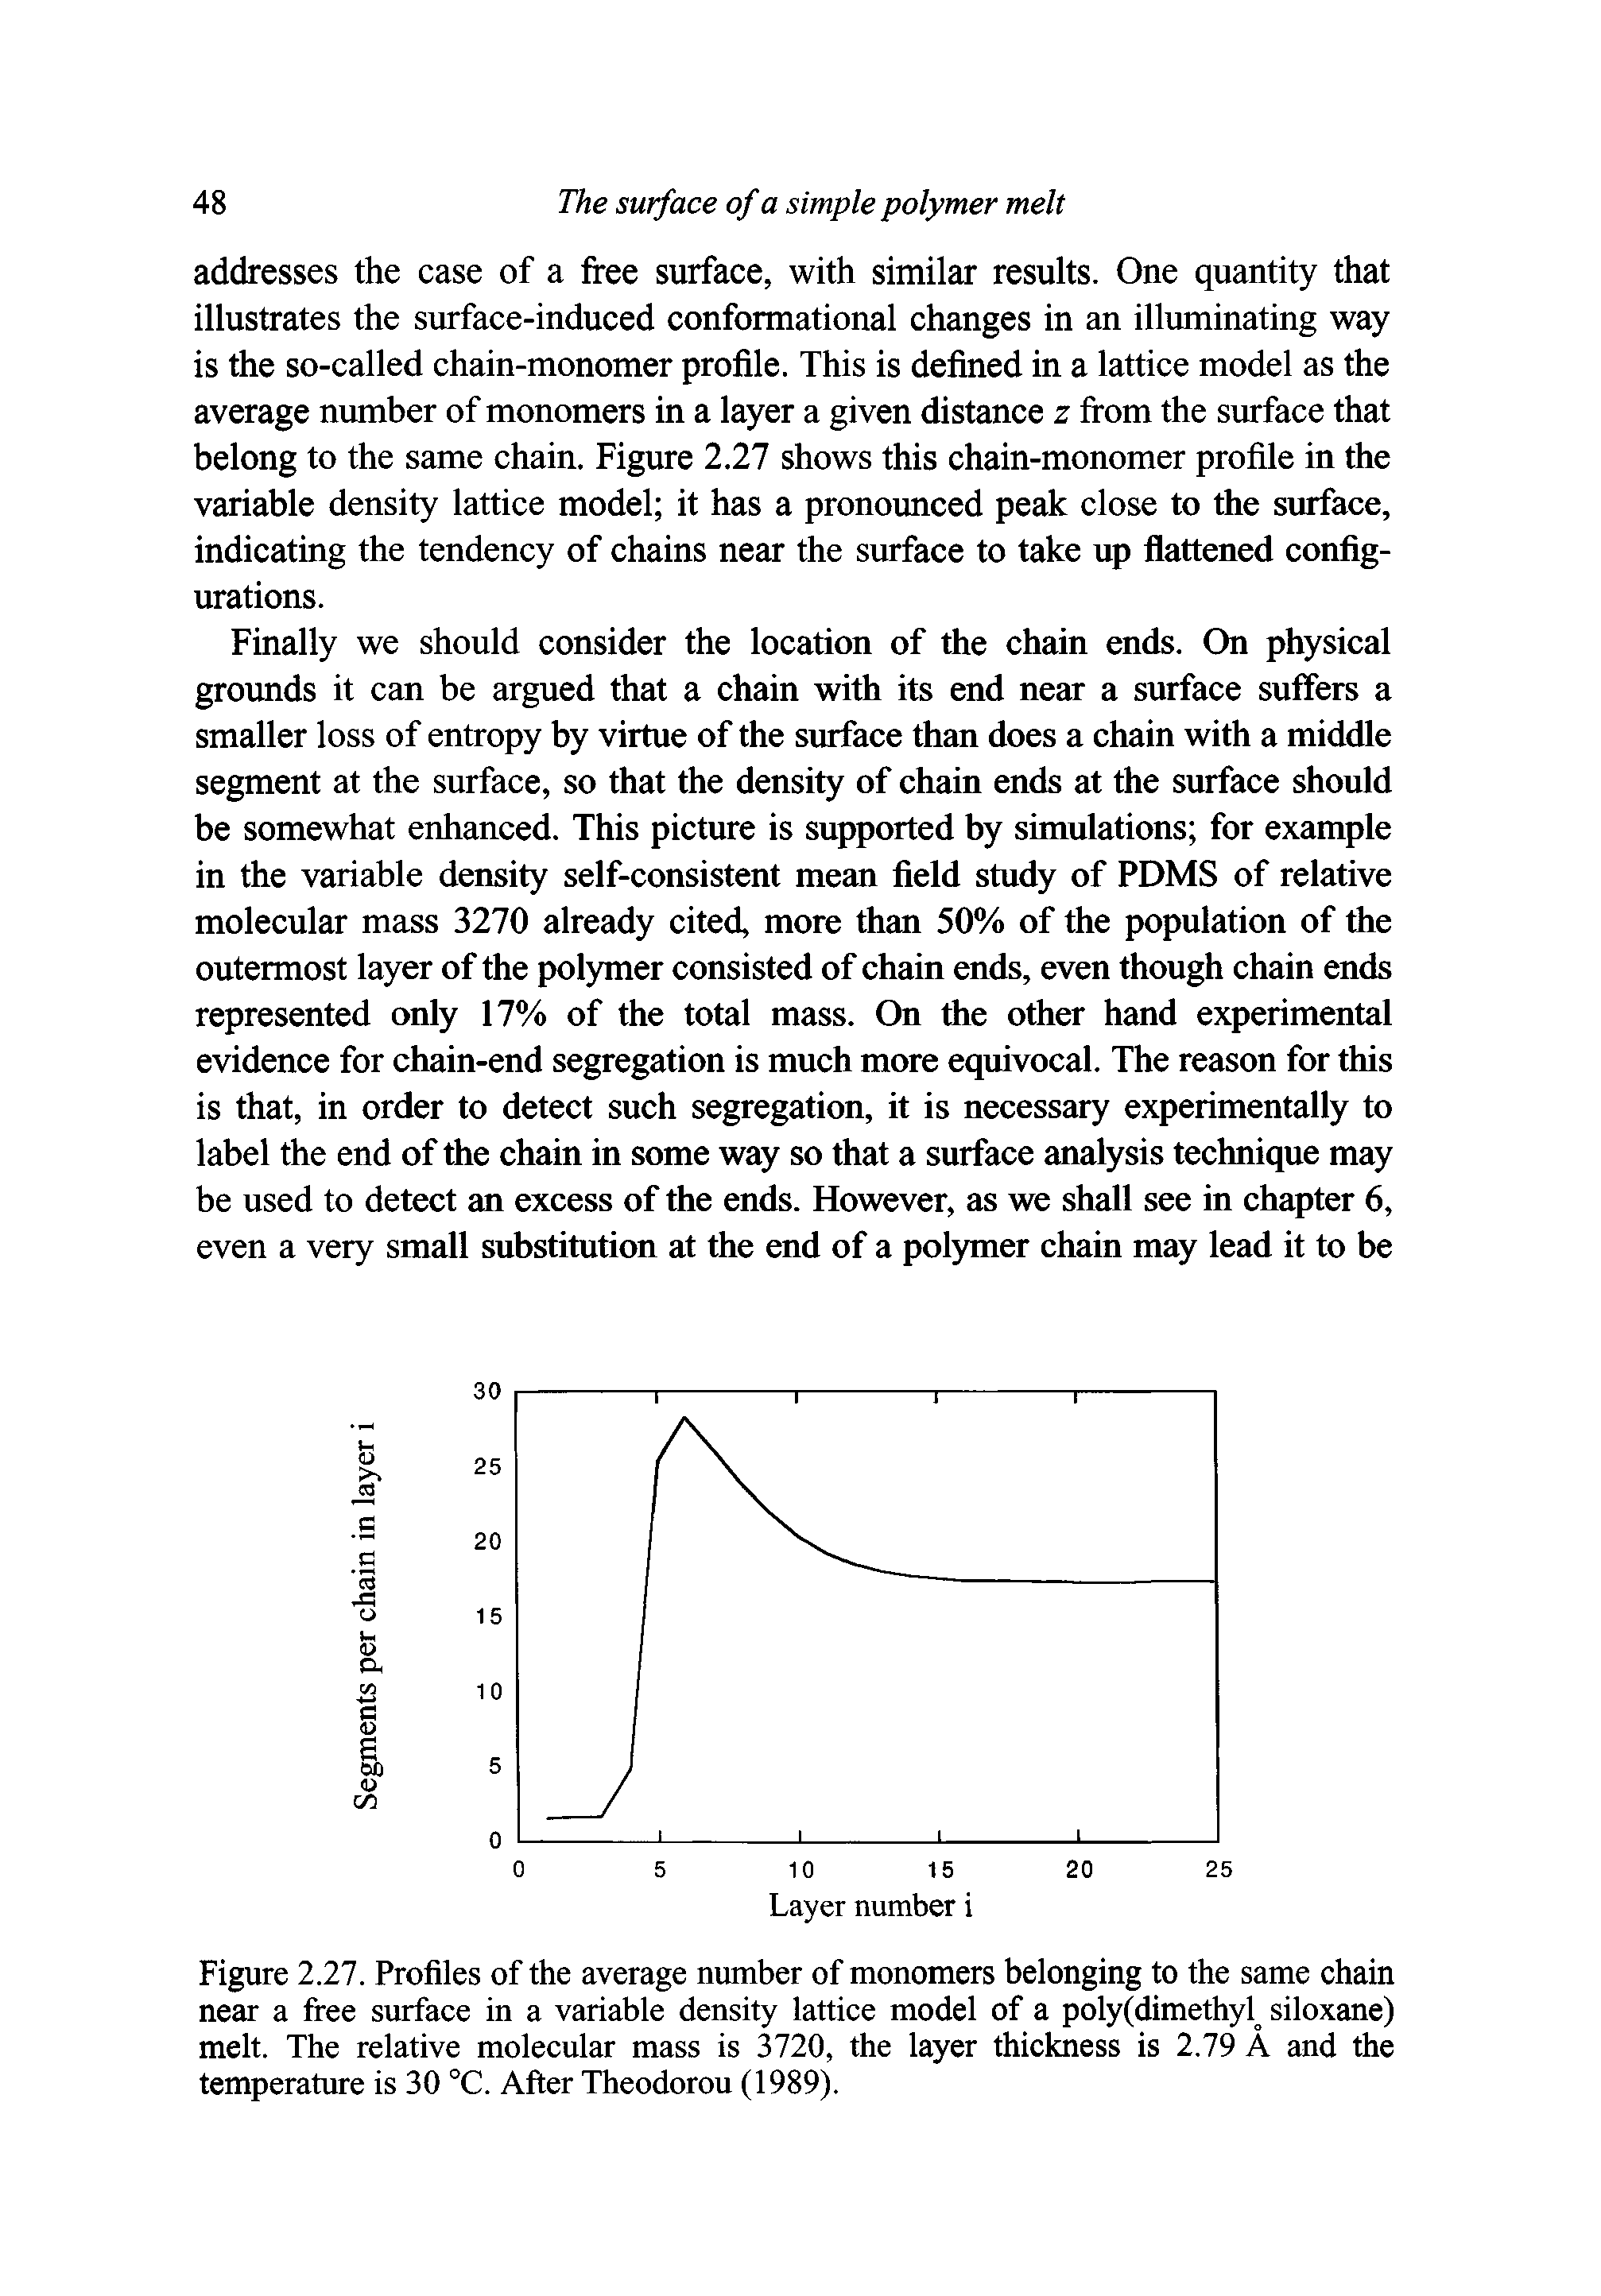 Figure 2.27. Profiles of the average number of monomers belonging to the same chain near a free surface in a variable density lattice model of a poly(dimethyl siloxane) melt. The relative molecular mass is 3720, the layer thickness is 2.79 A mid the temperature is 30 °C. After Theodorou (1989).